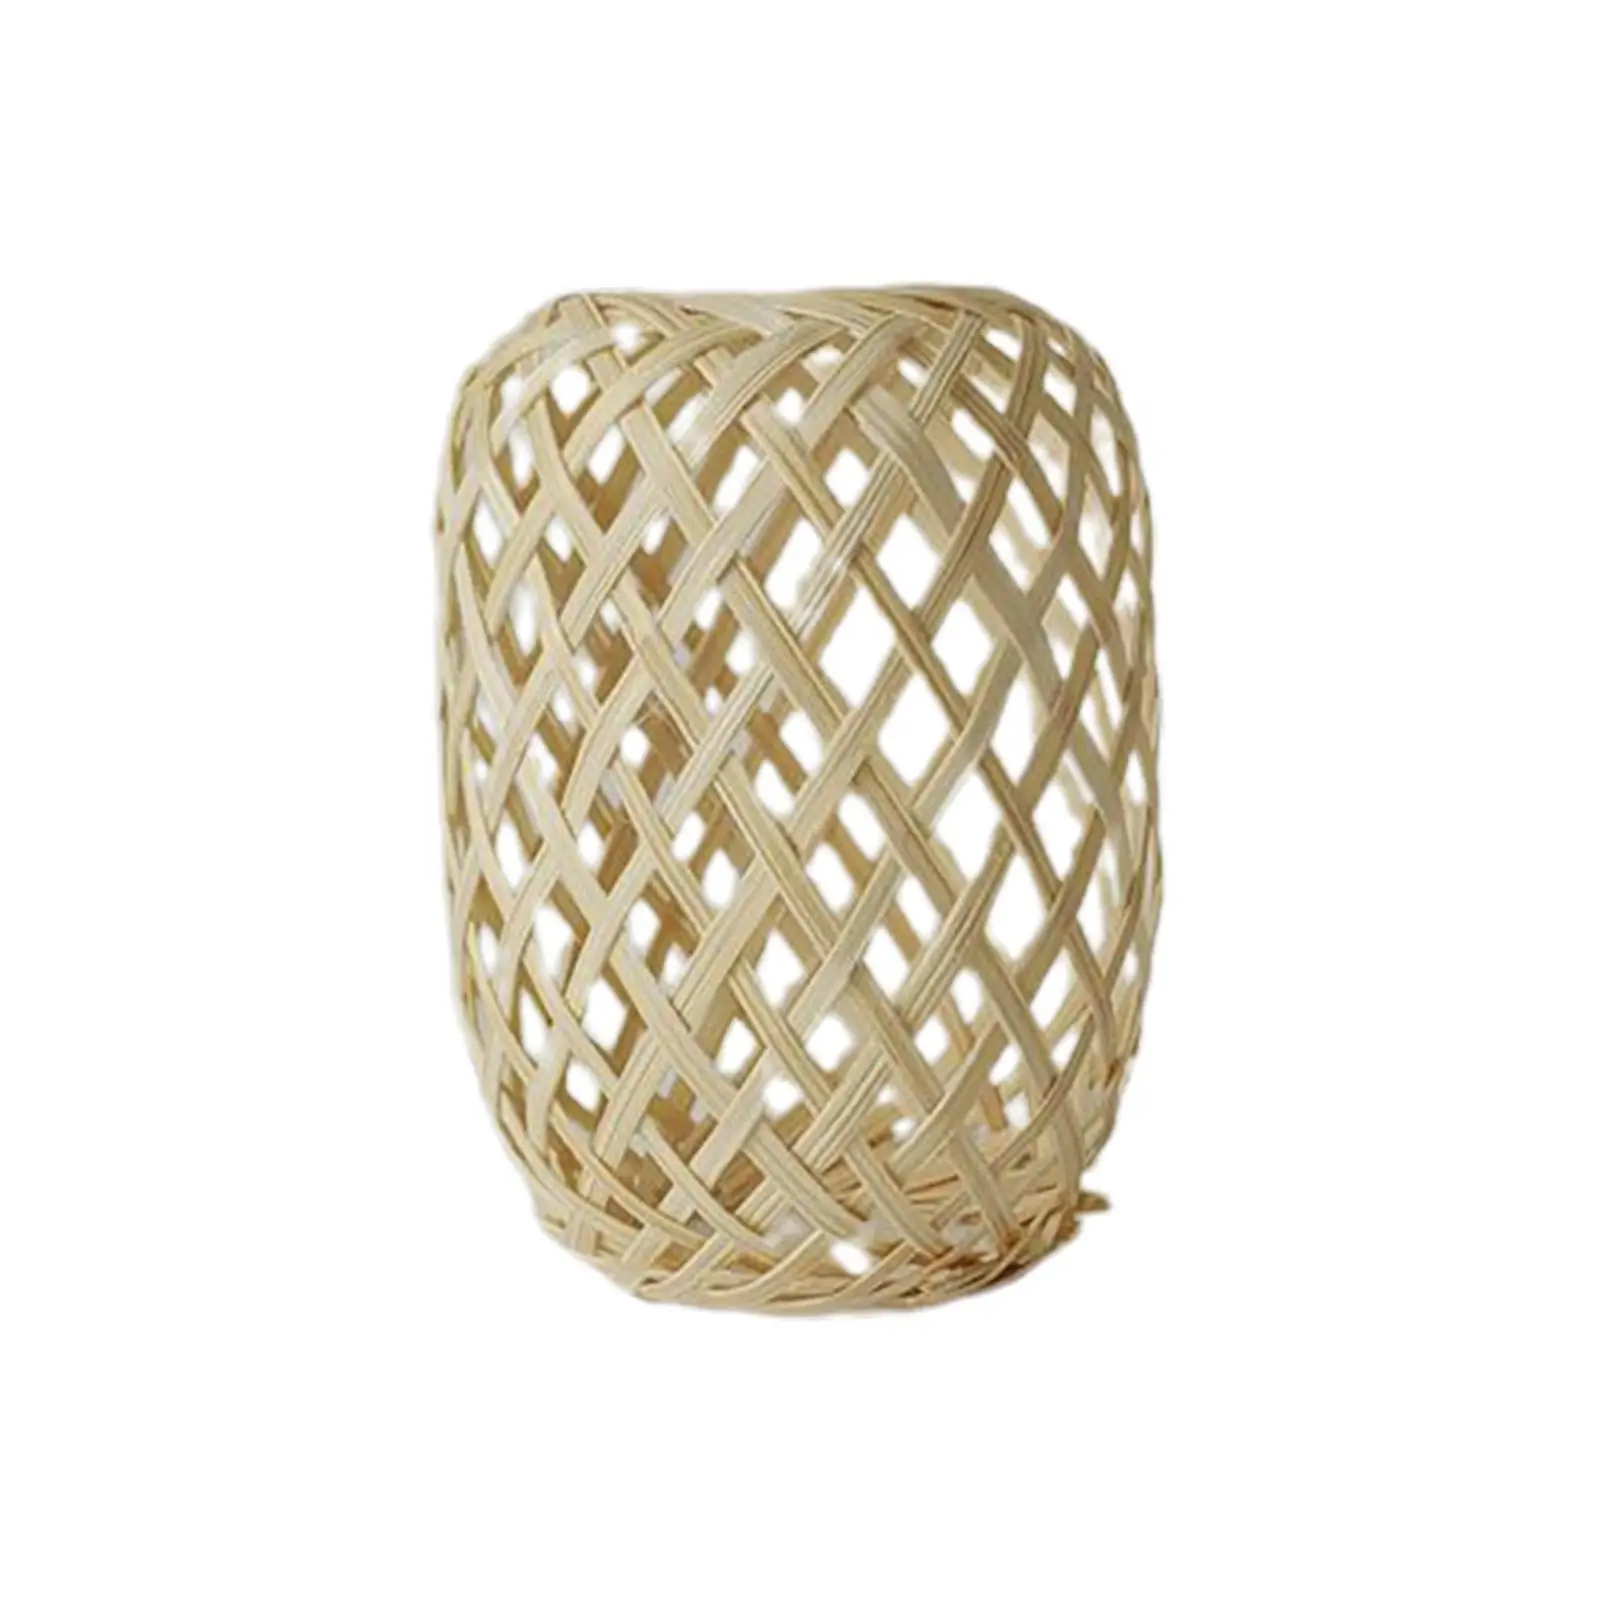 Classic Lantern Decorative Easy to Install Bamboo Woven Lamp Shade for Auto